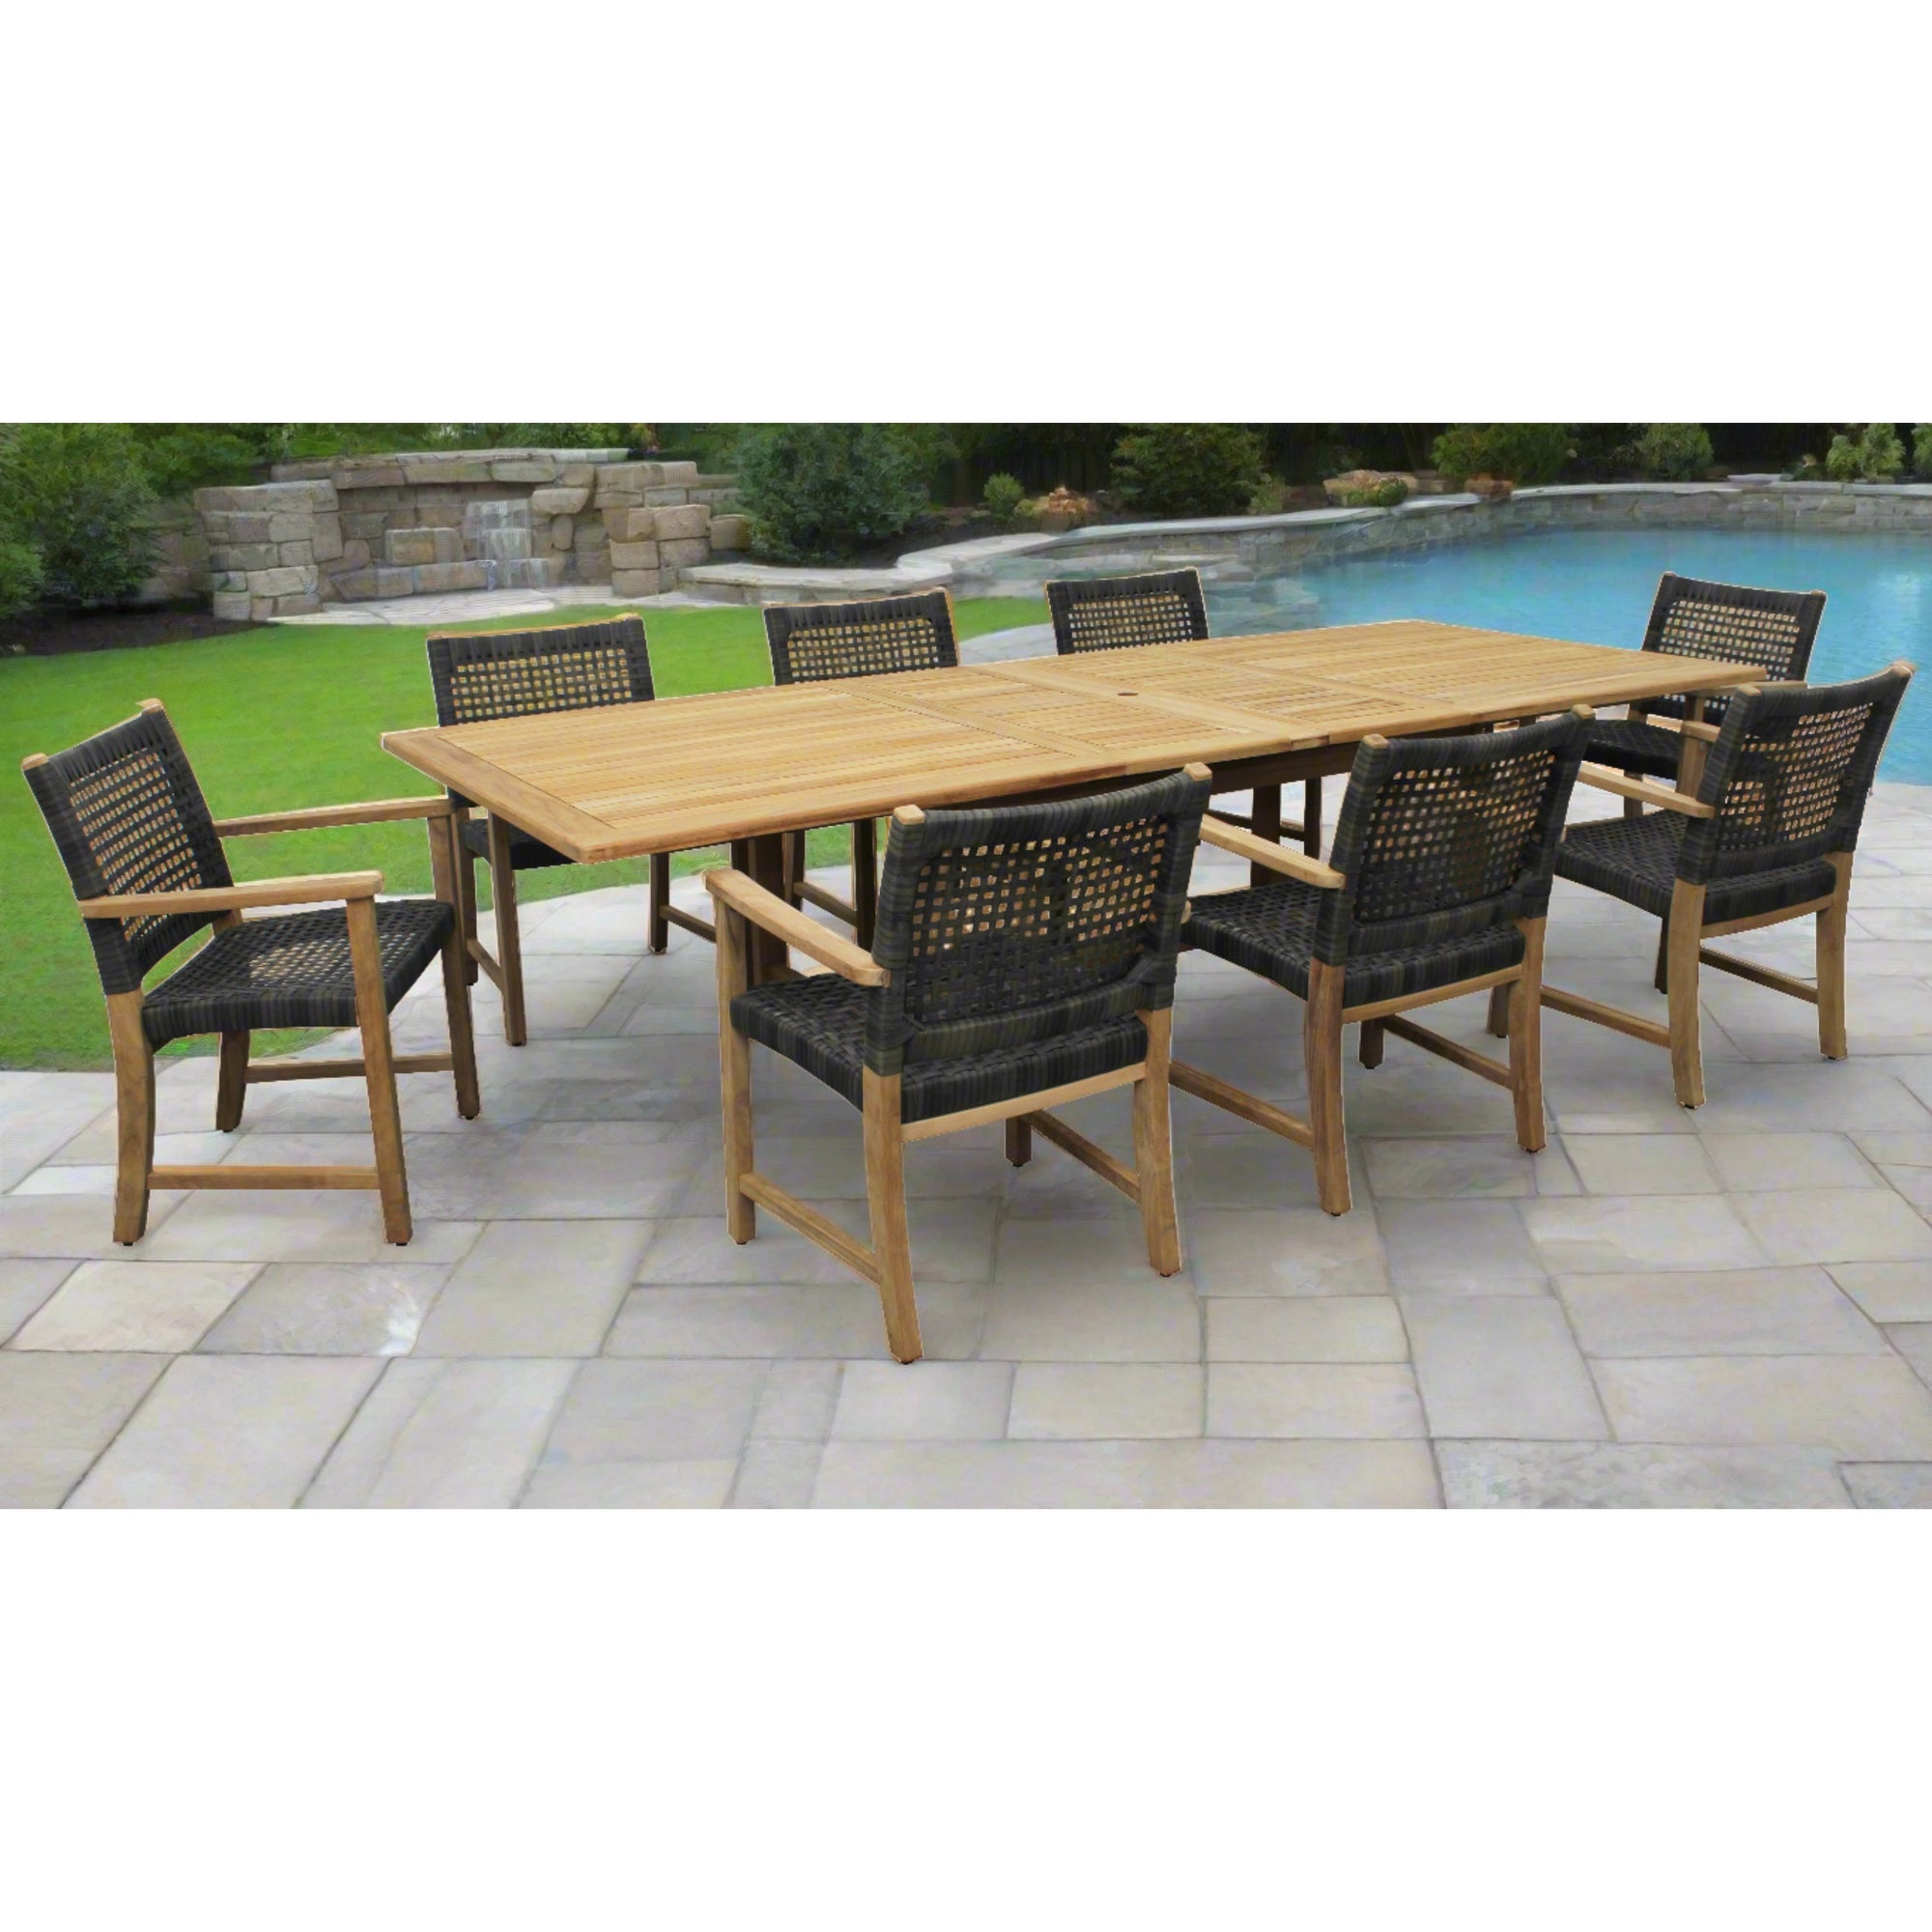 Teak Banquet 9pc Outdoor Dining Set (Teak Extendable Table 88-118" with 8 Woven Sanur Arnchairs)